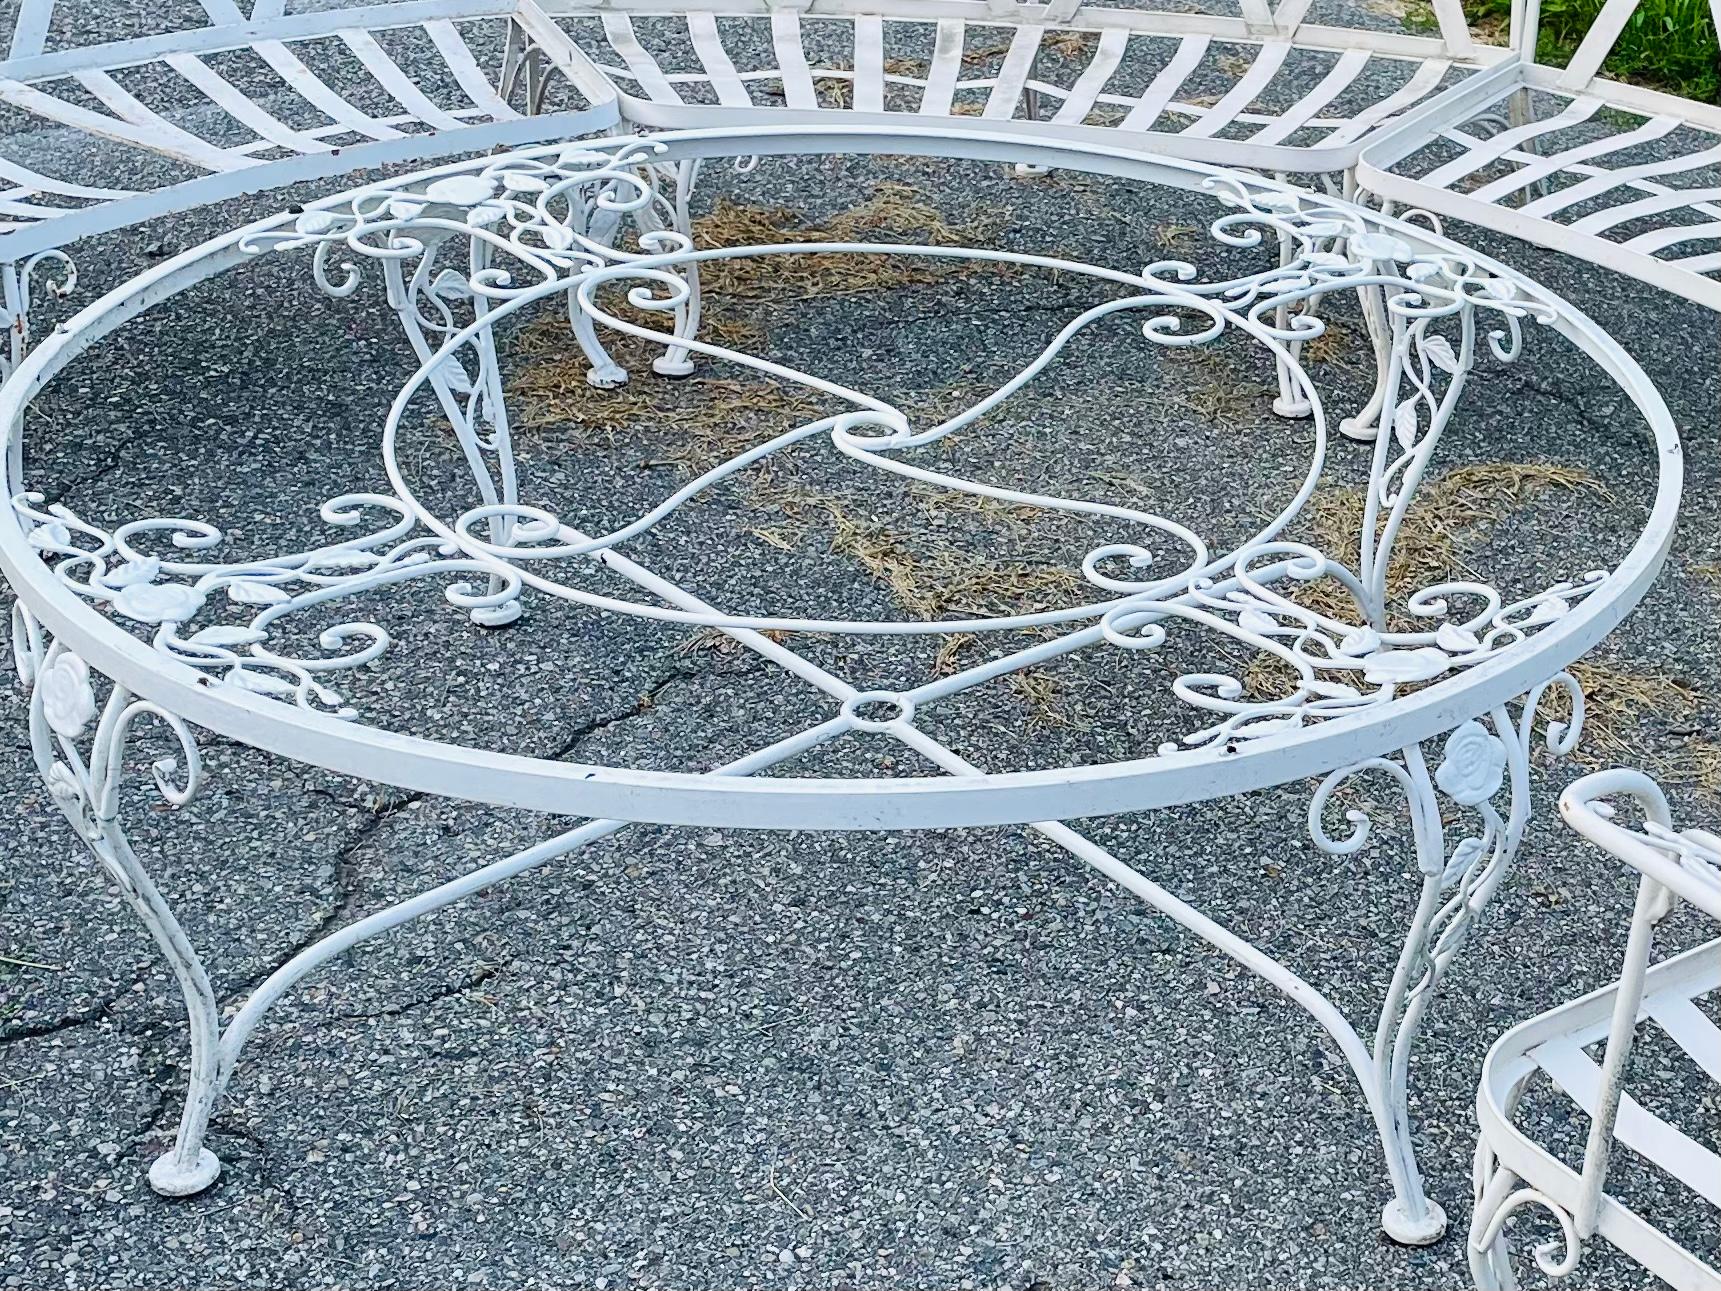 Vintage Wrought Iron Patio Set by Woodard

***Semi-Circle Sectional (3) piece and 48